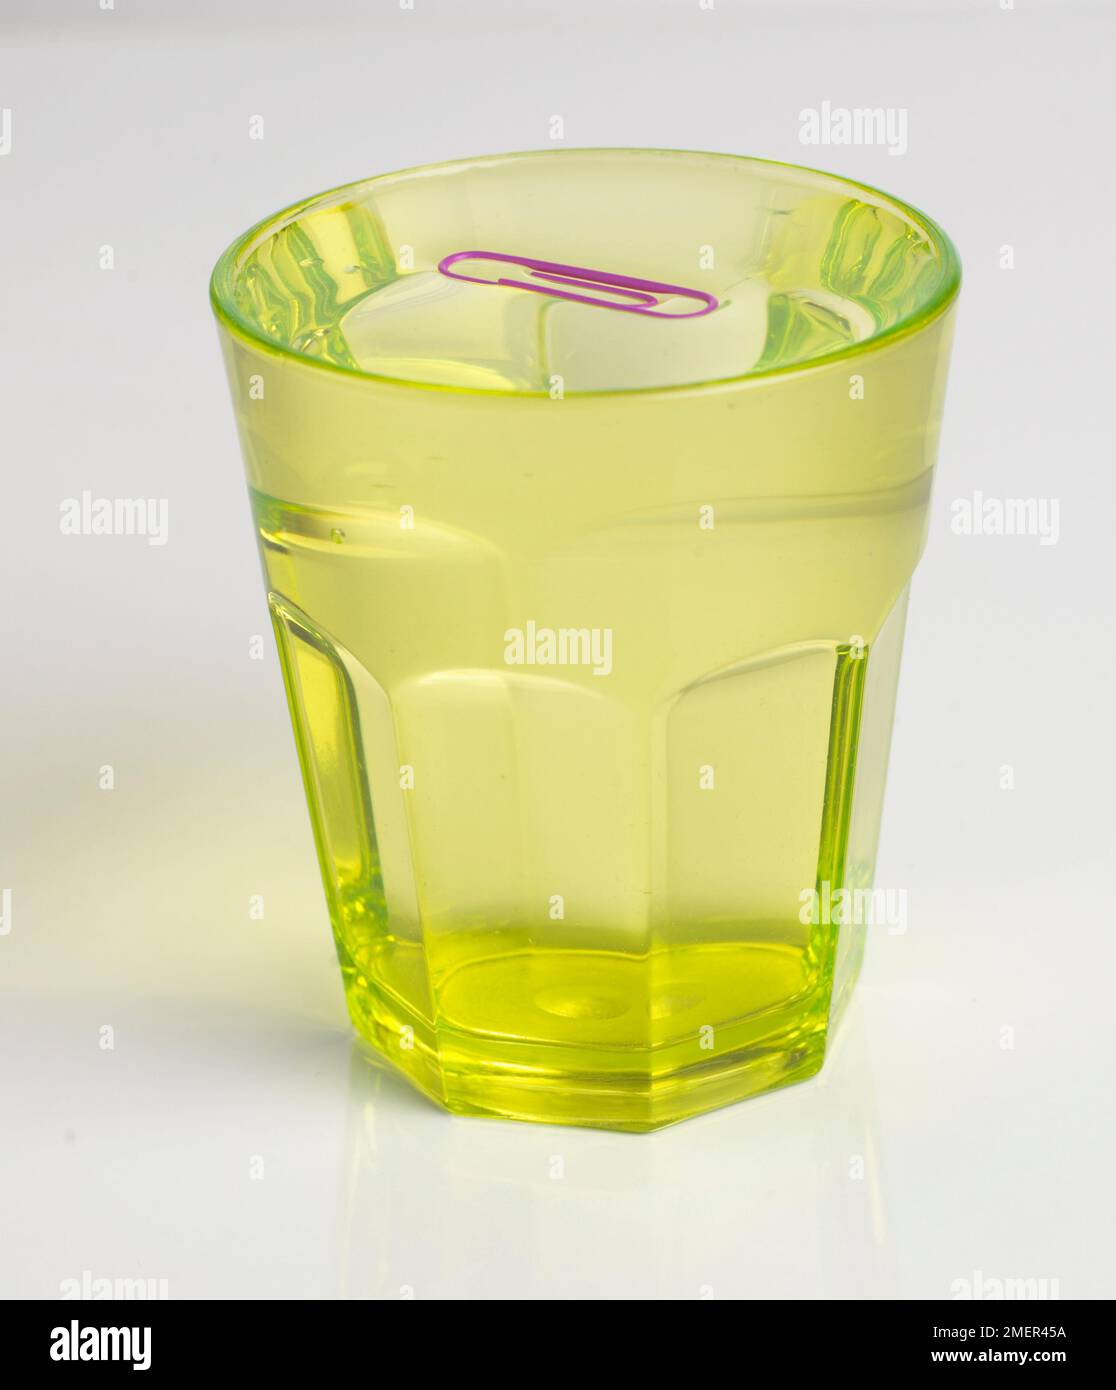 Glass of water with a papeclip floating on the top Stock Photo